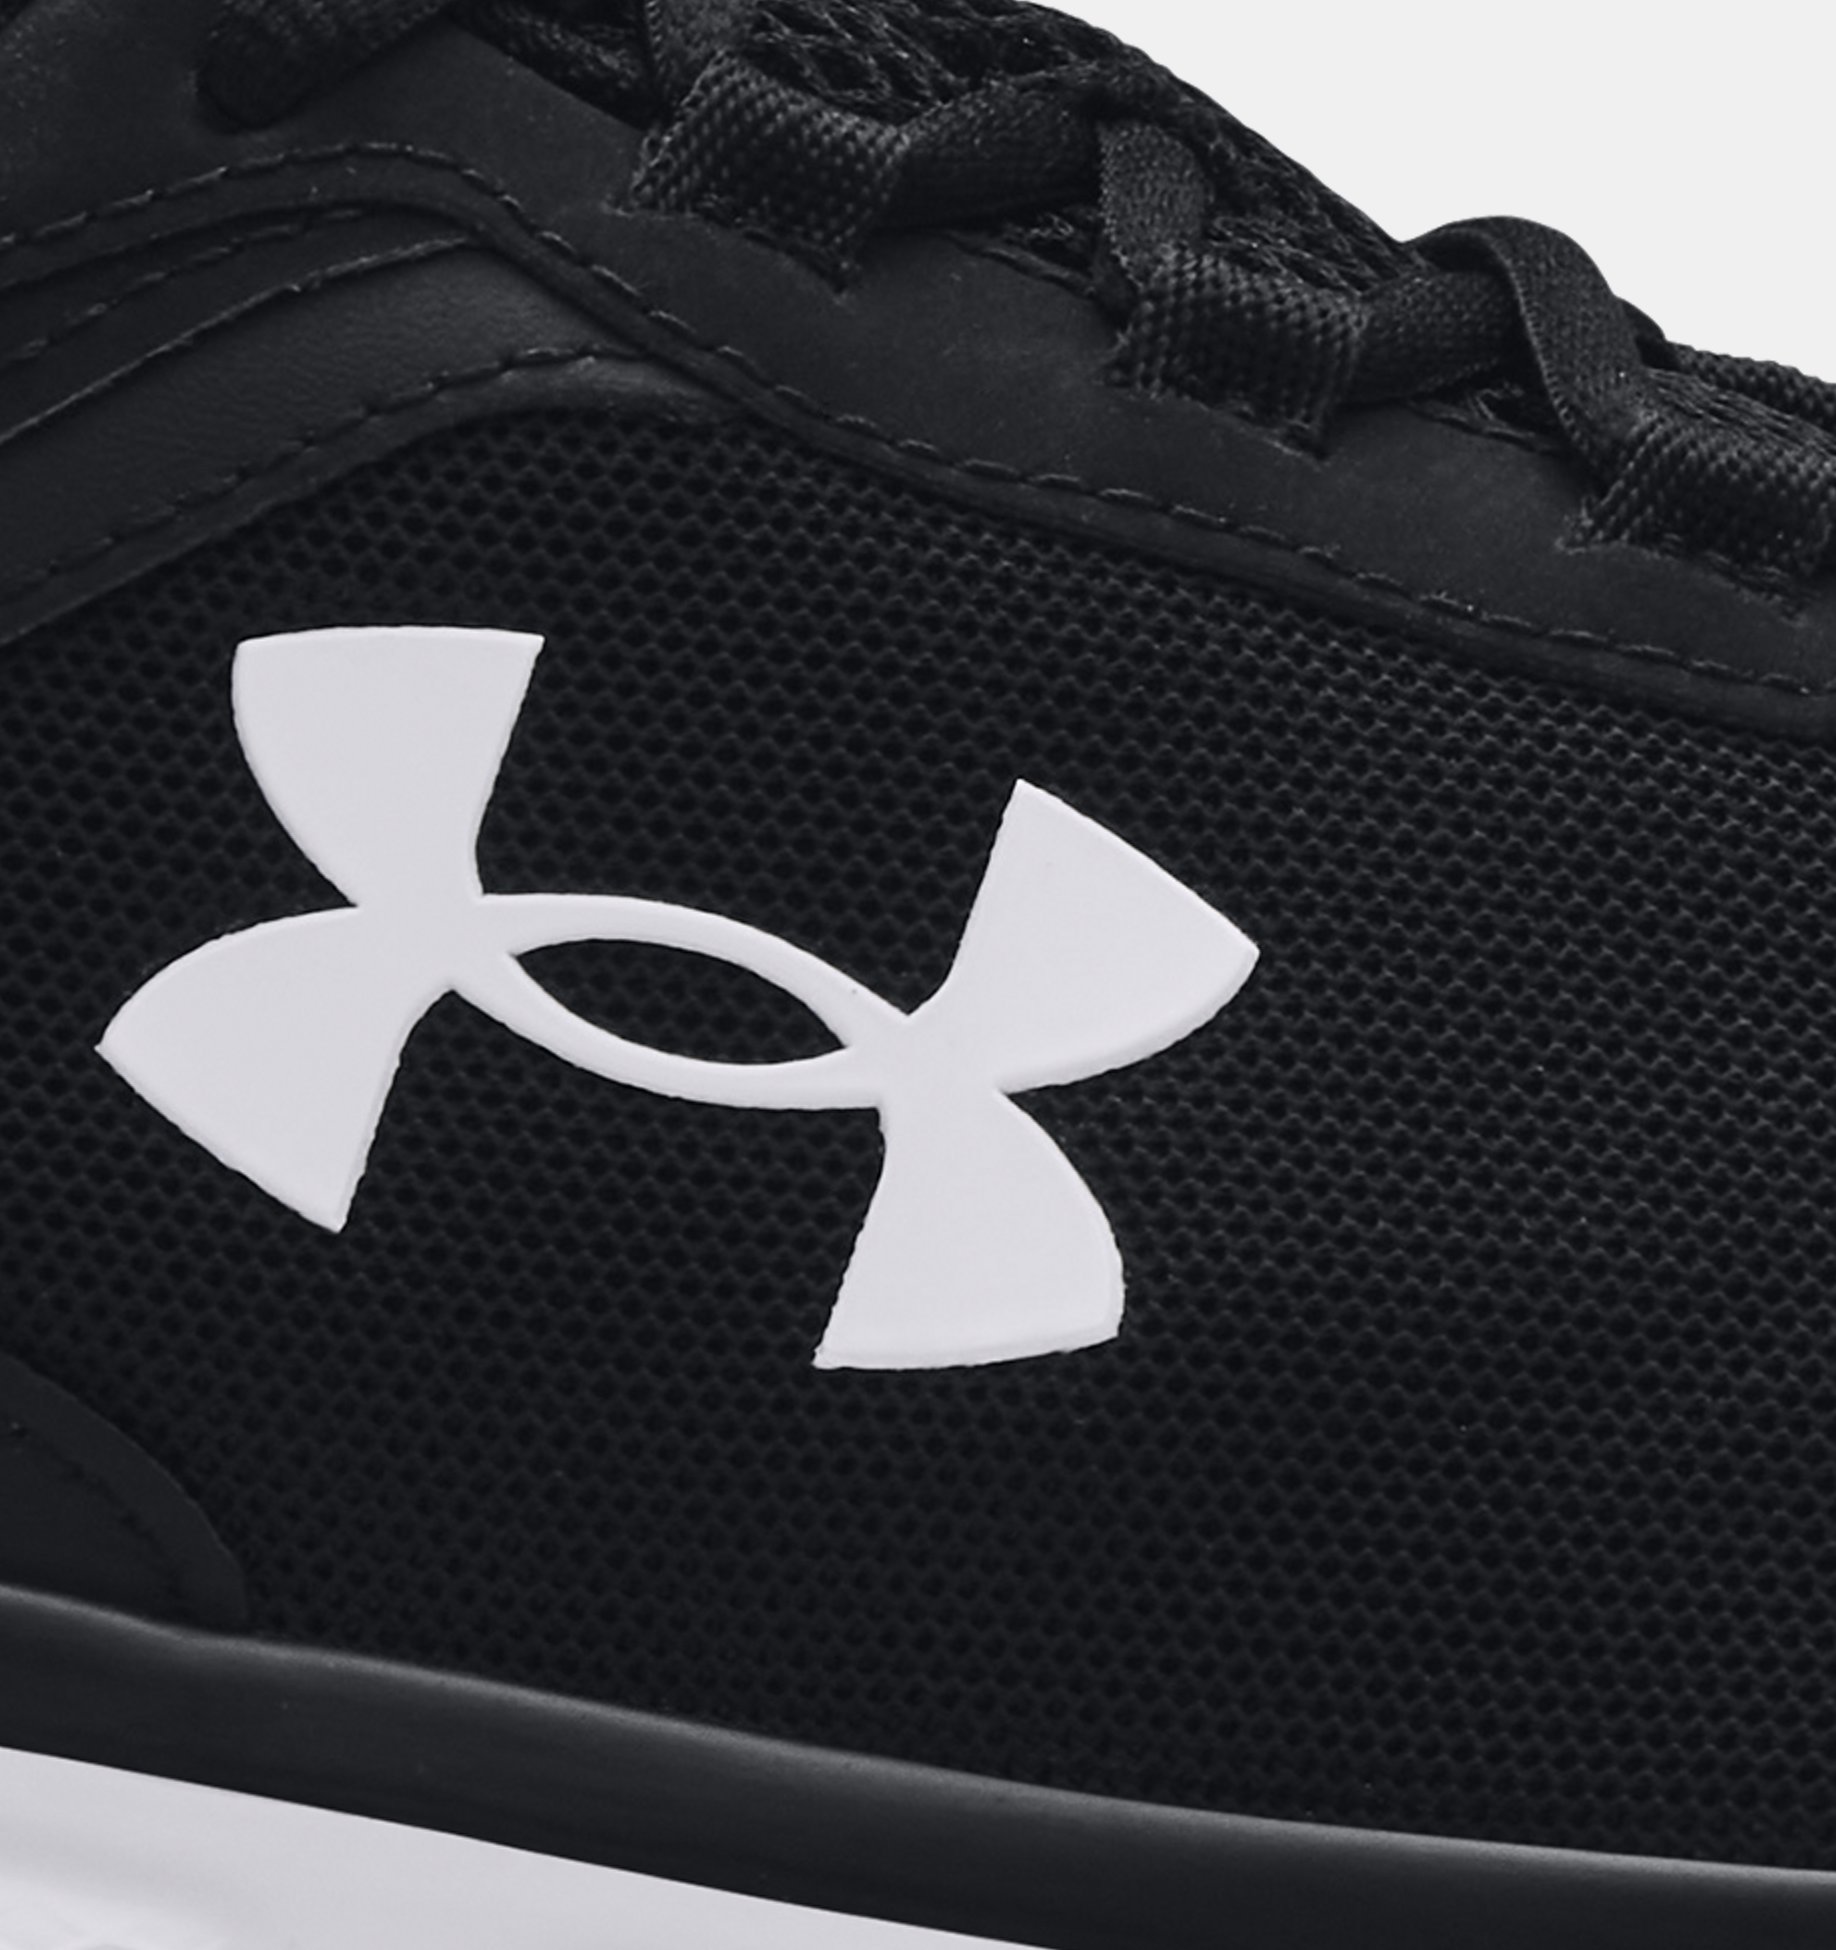 Does Under Armour Sell Wide Shoes?